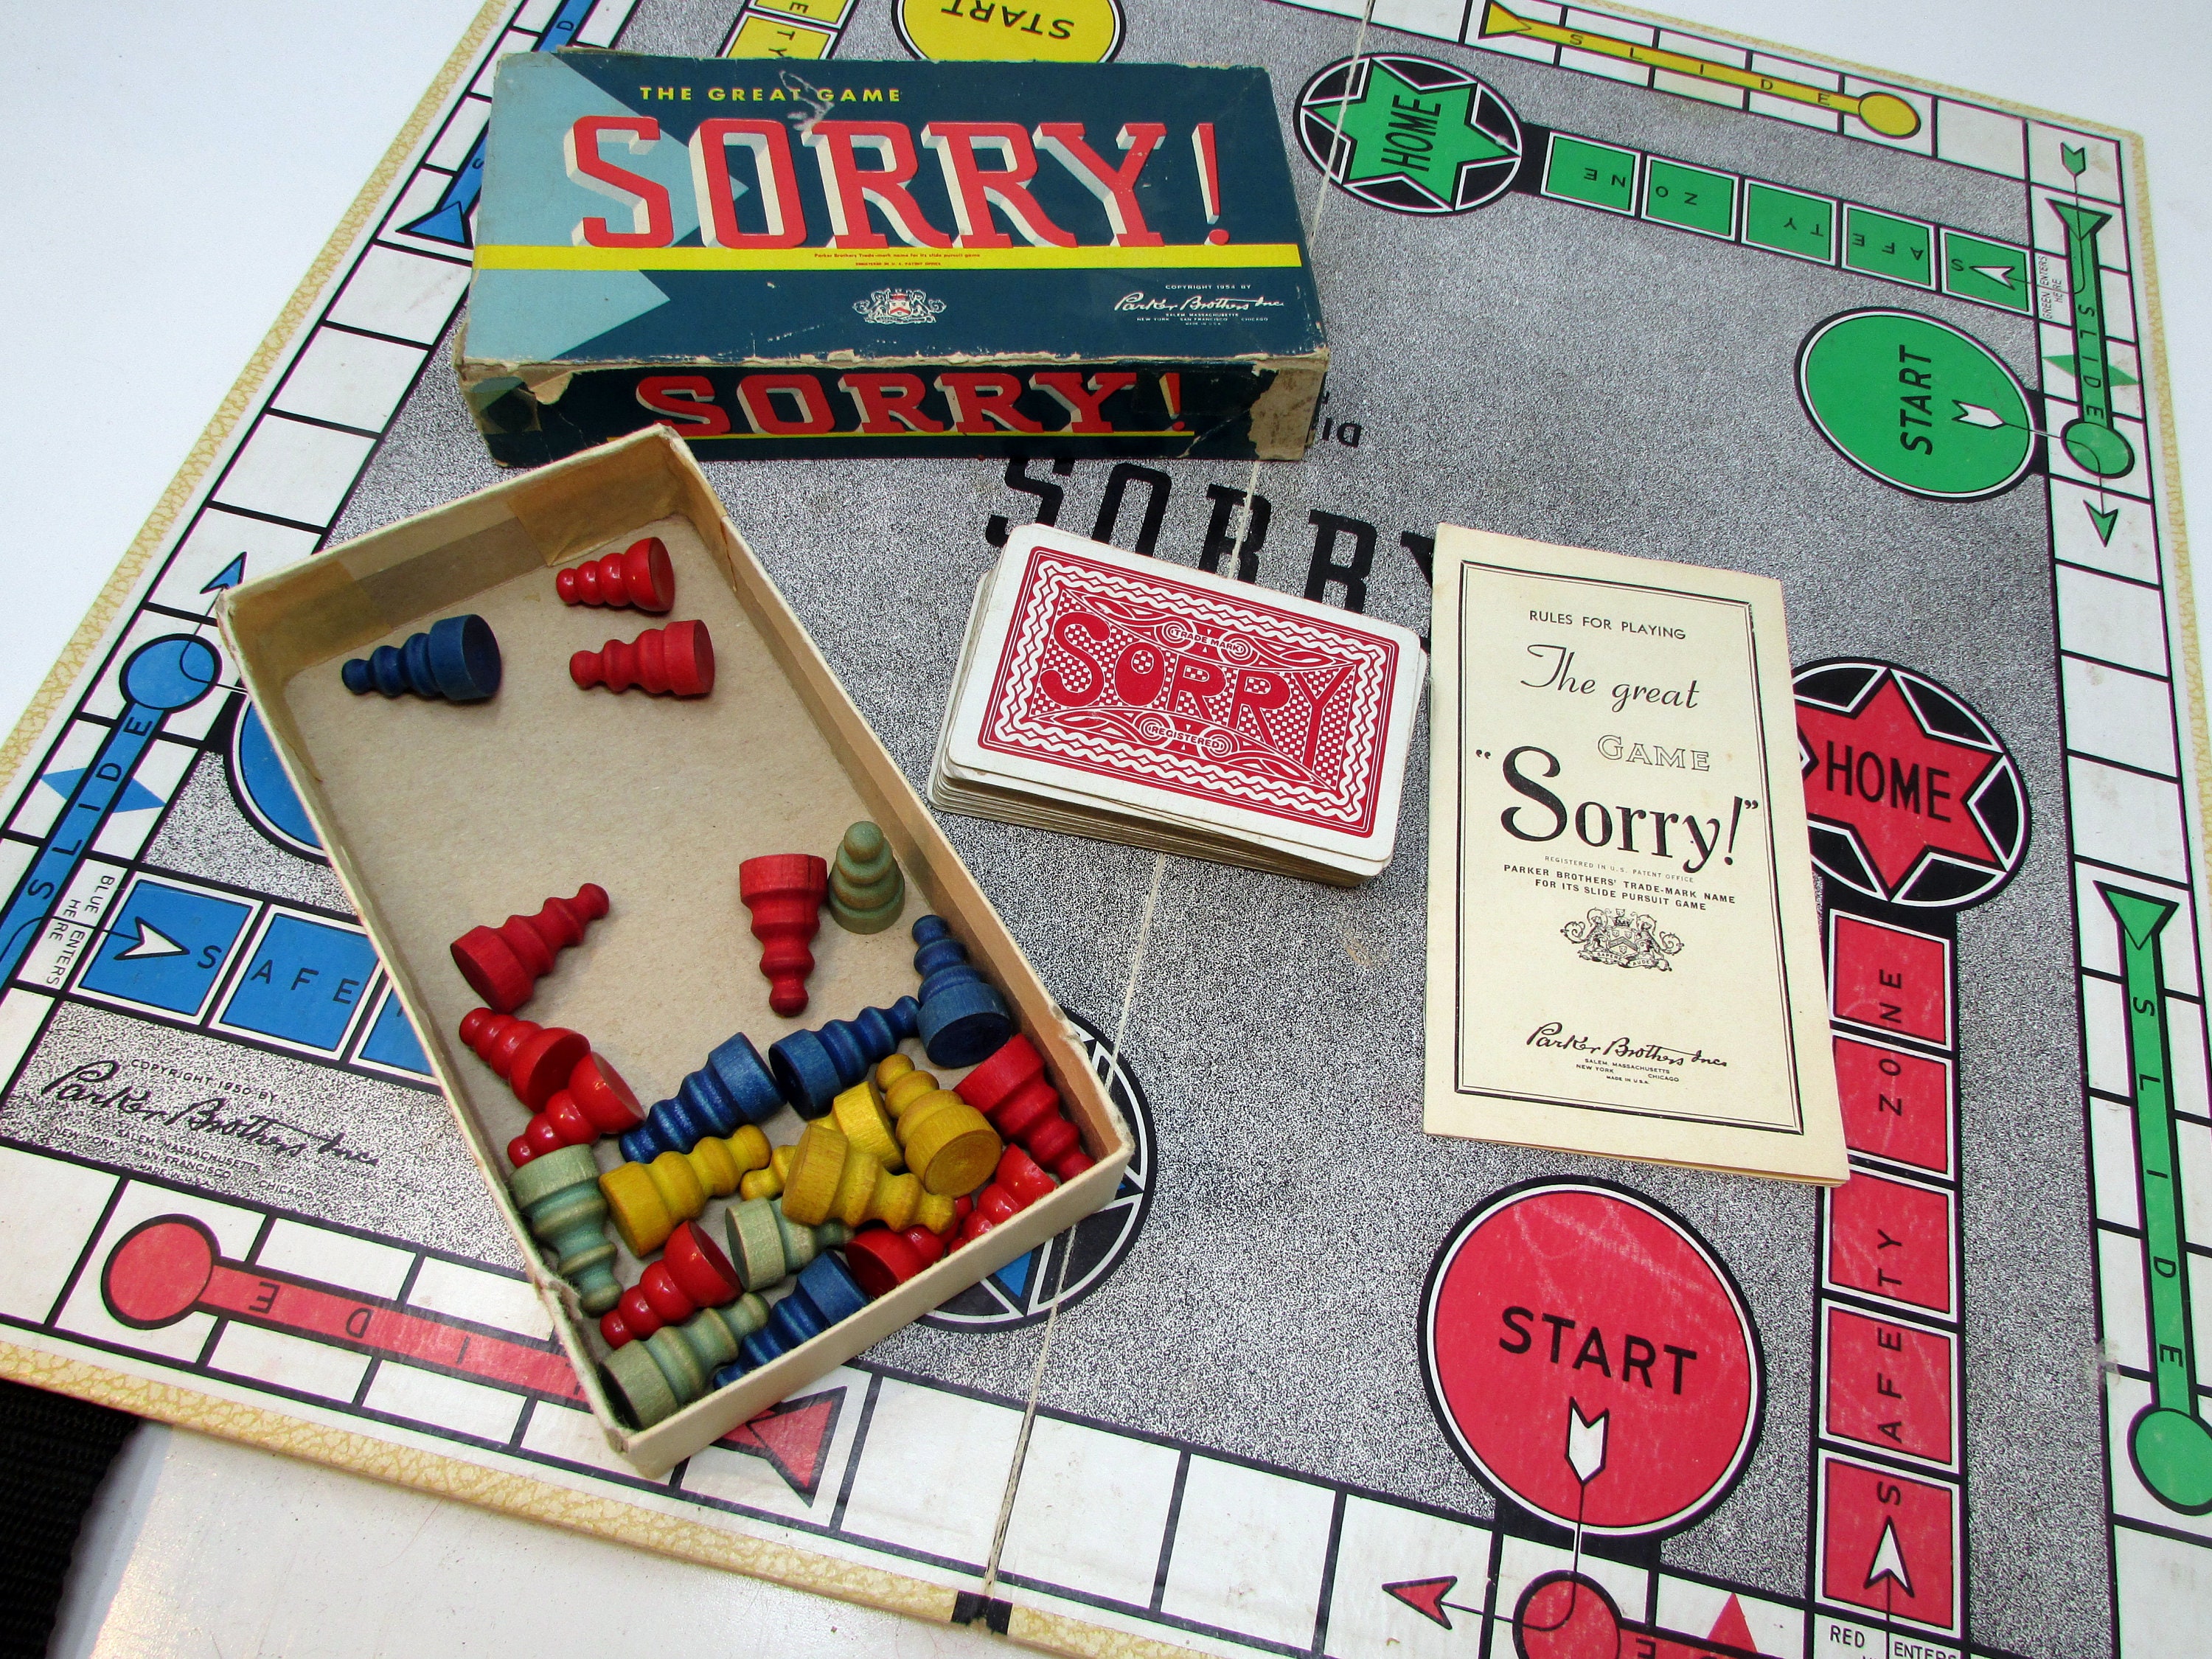 Sorry Board Game Replacement Parts & Pieces Individual Pawns Cards Vintage  1964